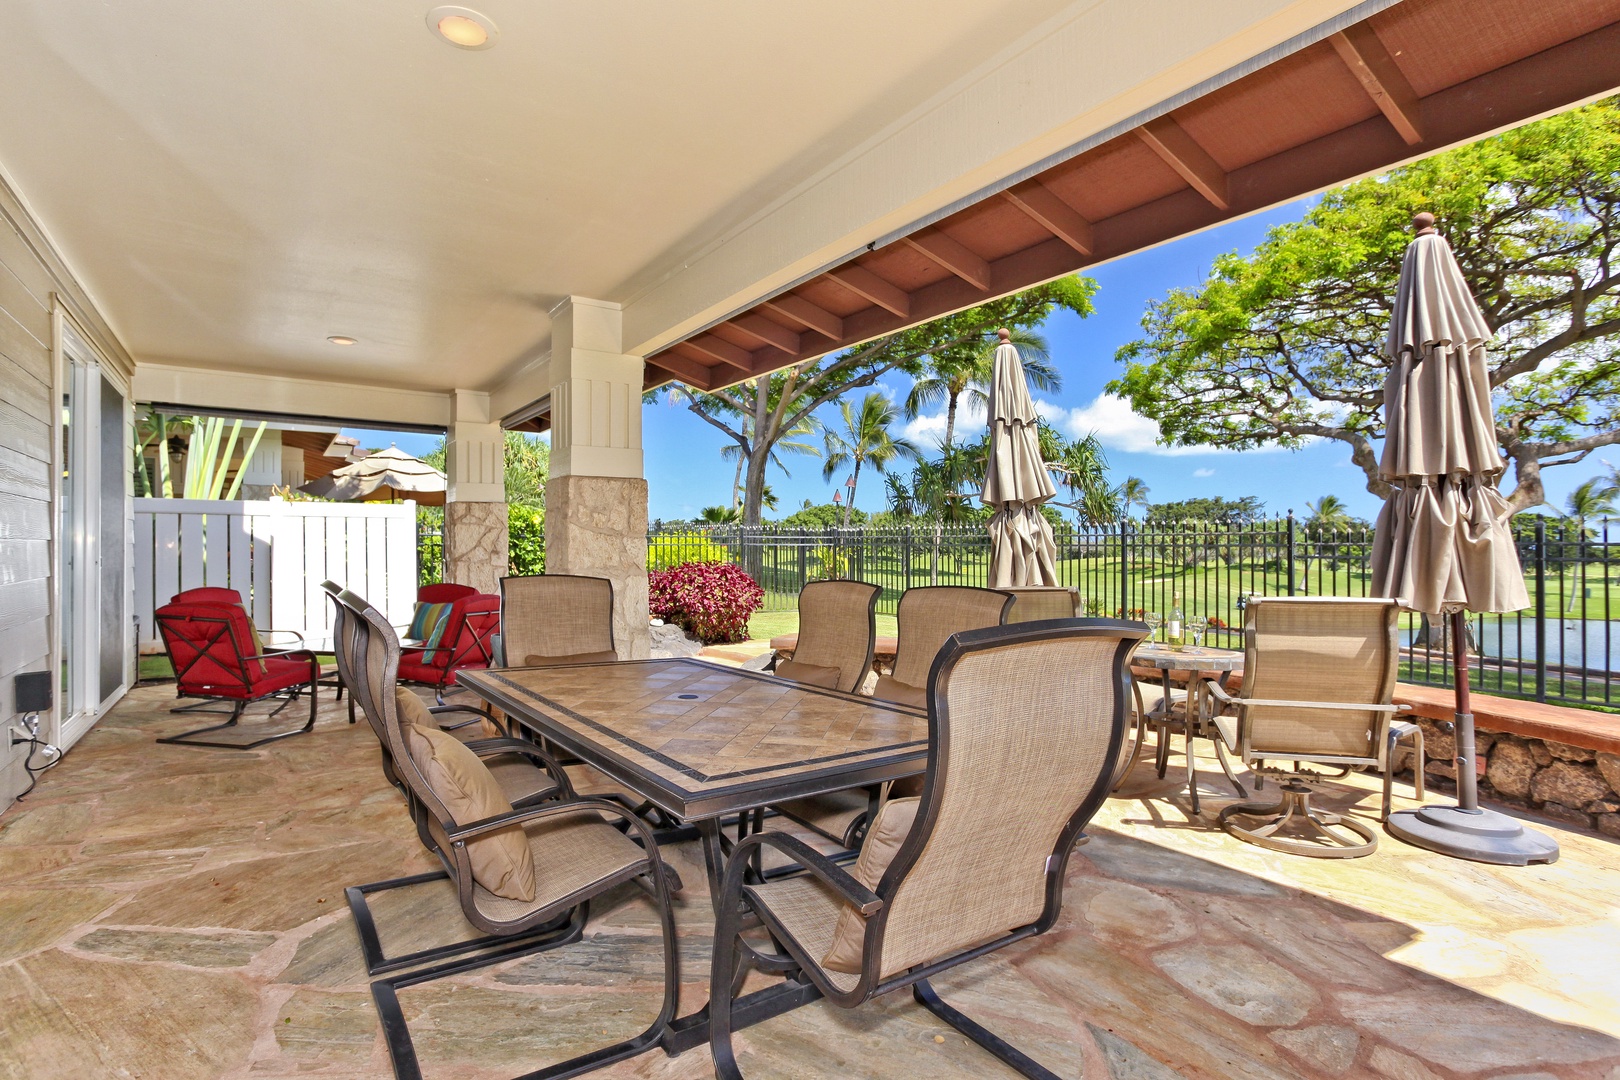 Kapolei Vacation Rentals, Ko Olina Kai Estate #20 - Another picture of the large lanai looking out at the 18th fairway.